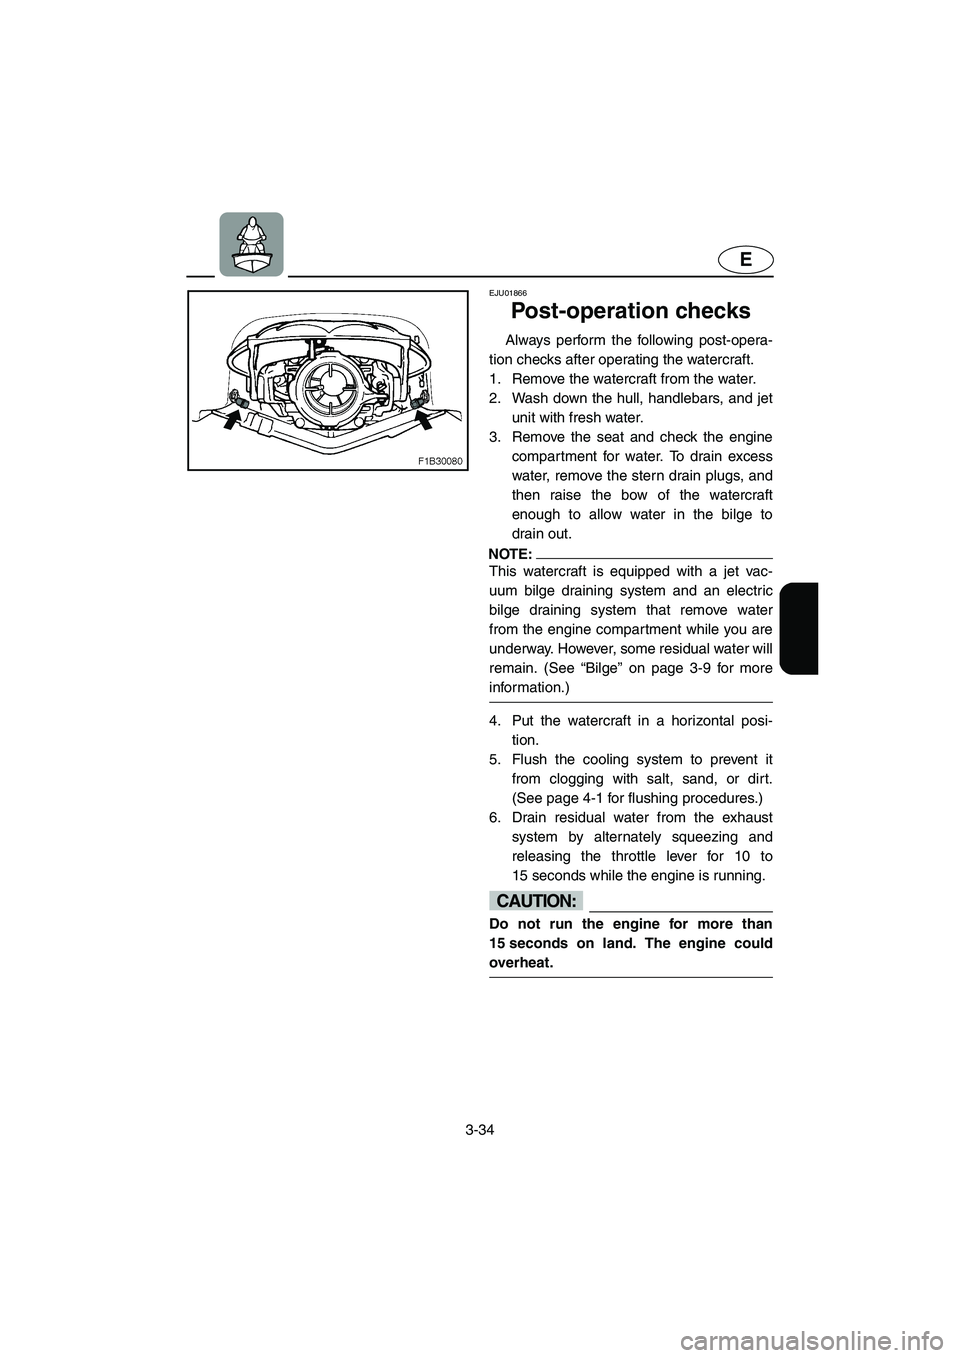 YAMAHA FX 2003  Owners Manual 3-34
E
EJU01866
Post-operation checks 
Always perform the following post-opera-
tion checks after operating the watercraft. 
1. Remove the watercraft from the water. 
2. Wash down the hull, handlebars